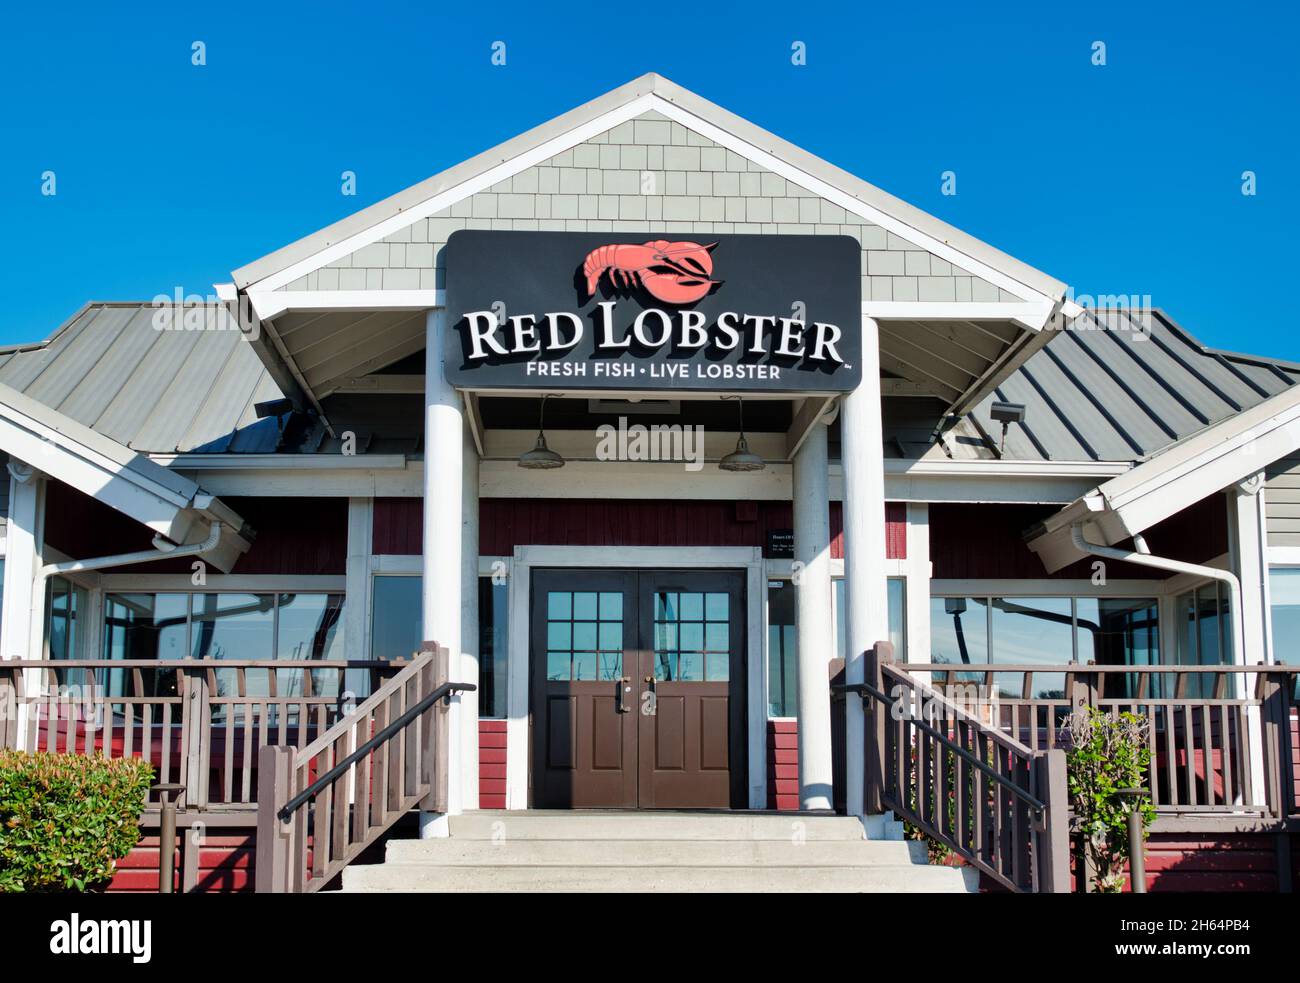 Houston, Texas USA 11-12-2021: Red Lobster storefront in Houston, TX. Global casual dining seafood restaurant chain founded in the USA in 1968. Stock Photo